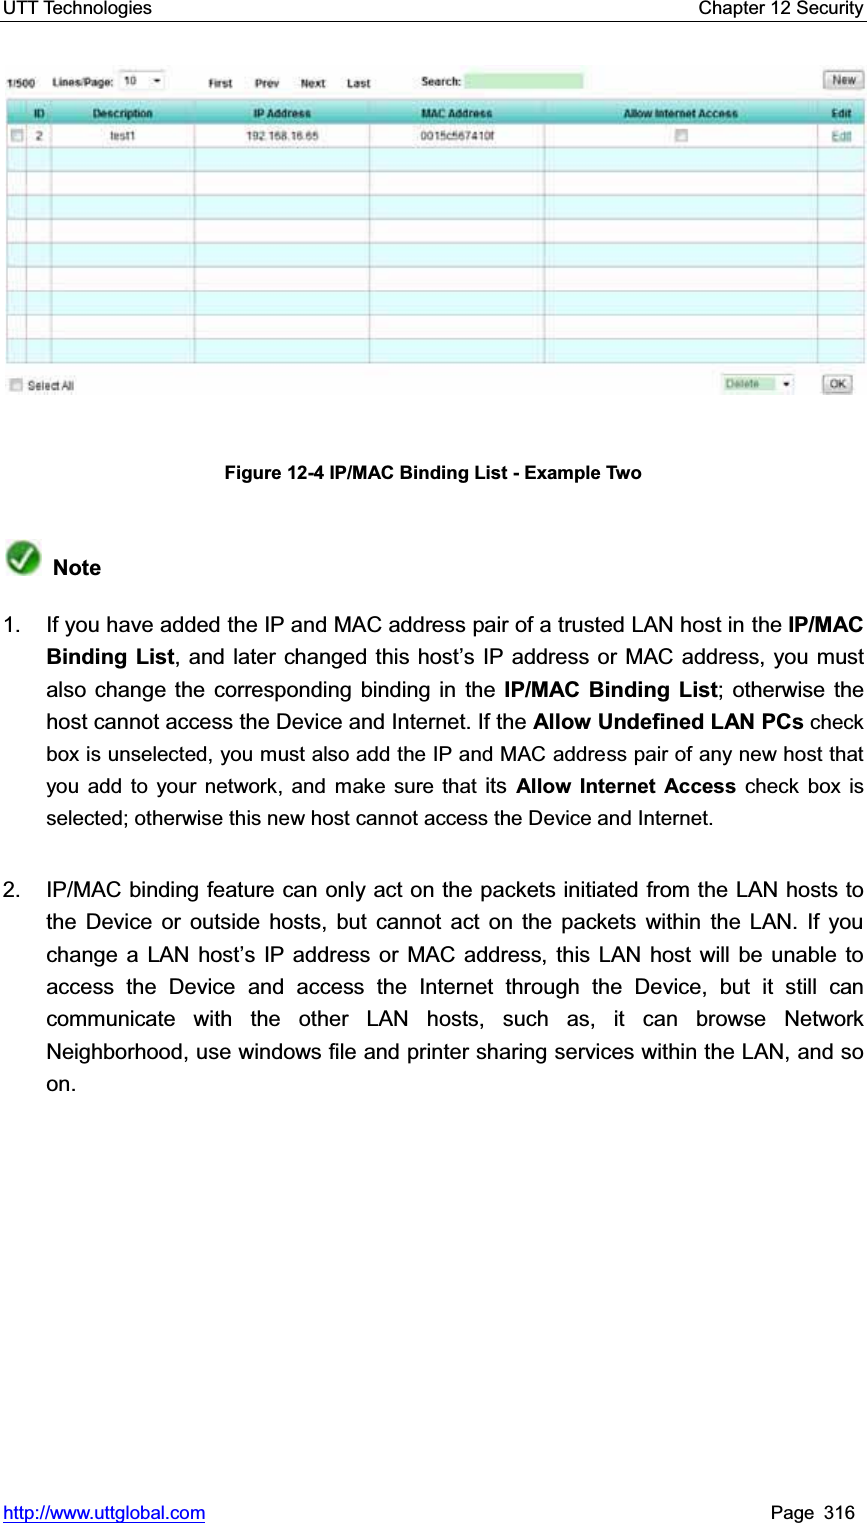 UTT Technologies    Chapter 12 Security   http://www.uttglobal.com Page 316 Figure 12-4 IP/MAC Binding List - Example Two Note1.  If you have added the IP and MAC address pair of a trusted LAN host in the IP/MAC Binding List, and later changed this host¶s IP address or MAC address, you must also change the corresponding binding in the IP/MAC Binding List; otherwise the host cannot access the Device and Internet. If the Allow Undefined LAN PCs check box is unselected, you must also add the IP and MAC address pair of any new host that you add to your network, and make sure that its  Allow Internet Access check box is selected; otherwise this new host cannot access the Device and Internet. 2.  IP/MAC binding feature can only act on the packets initiated from the LAN hosts to the Device or outside hosts, but cannot act on the packets within the LAN. If you change a LAN host¶s IP address or MAC address, this LAN host will be unable to access the Device and access the Internet through the Device, but it still cancommunicate with the other LAN hosts, such as, it can browse Network Neighborhood, use windows file and printer sharing services within the LAN, and so on.  